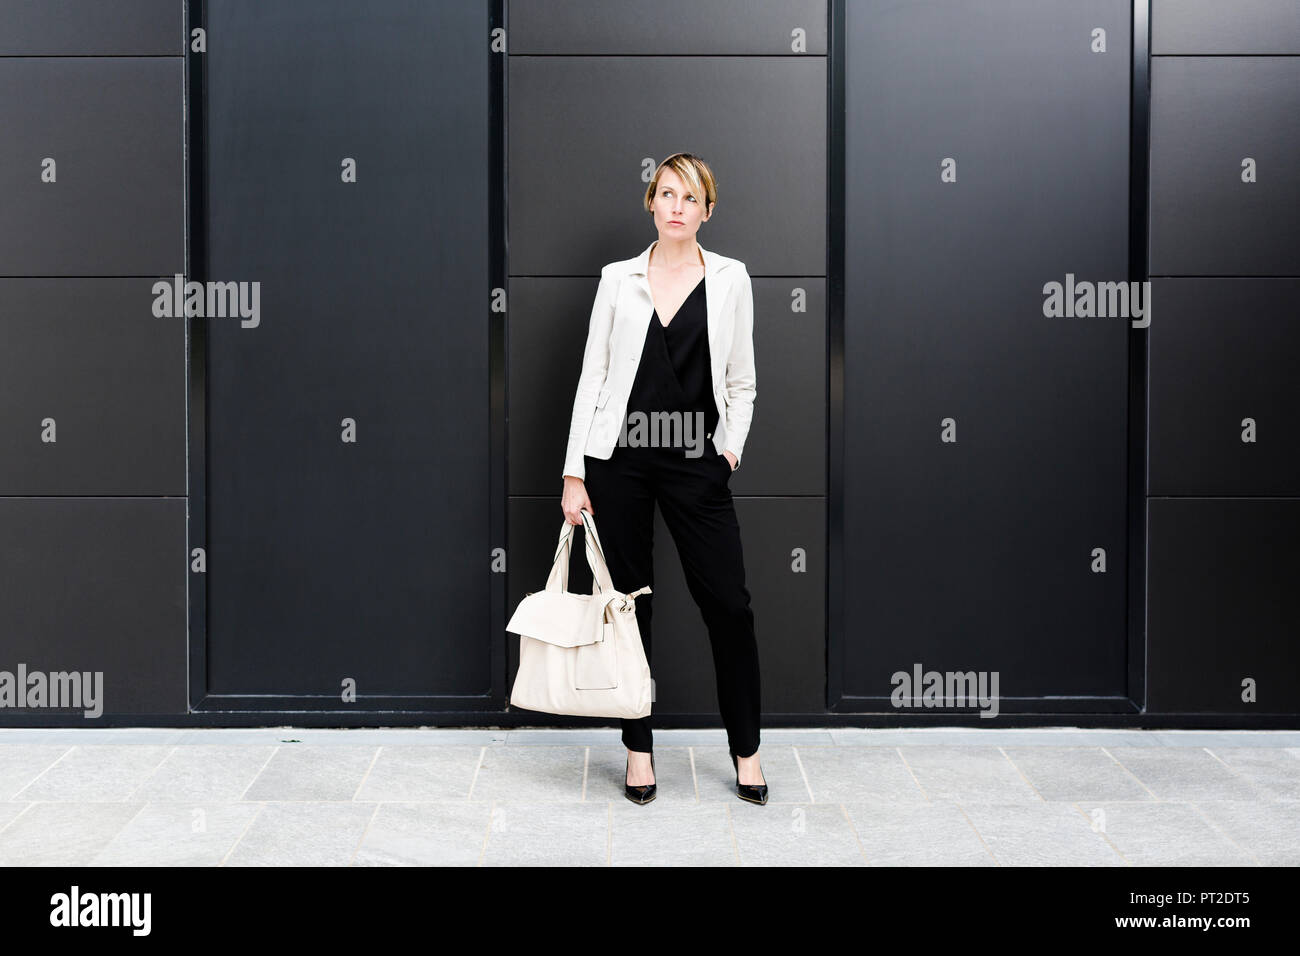 Fashionable businesswoman wearing black and white clothes Stock Photo